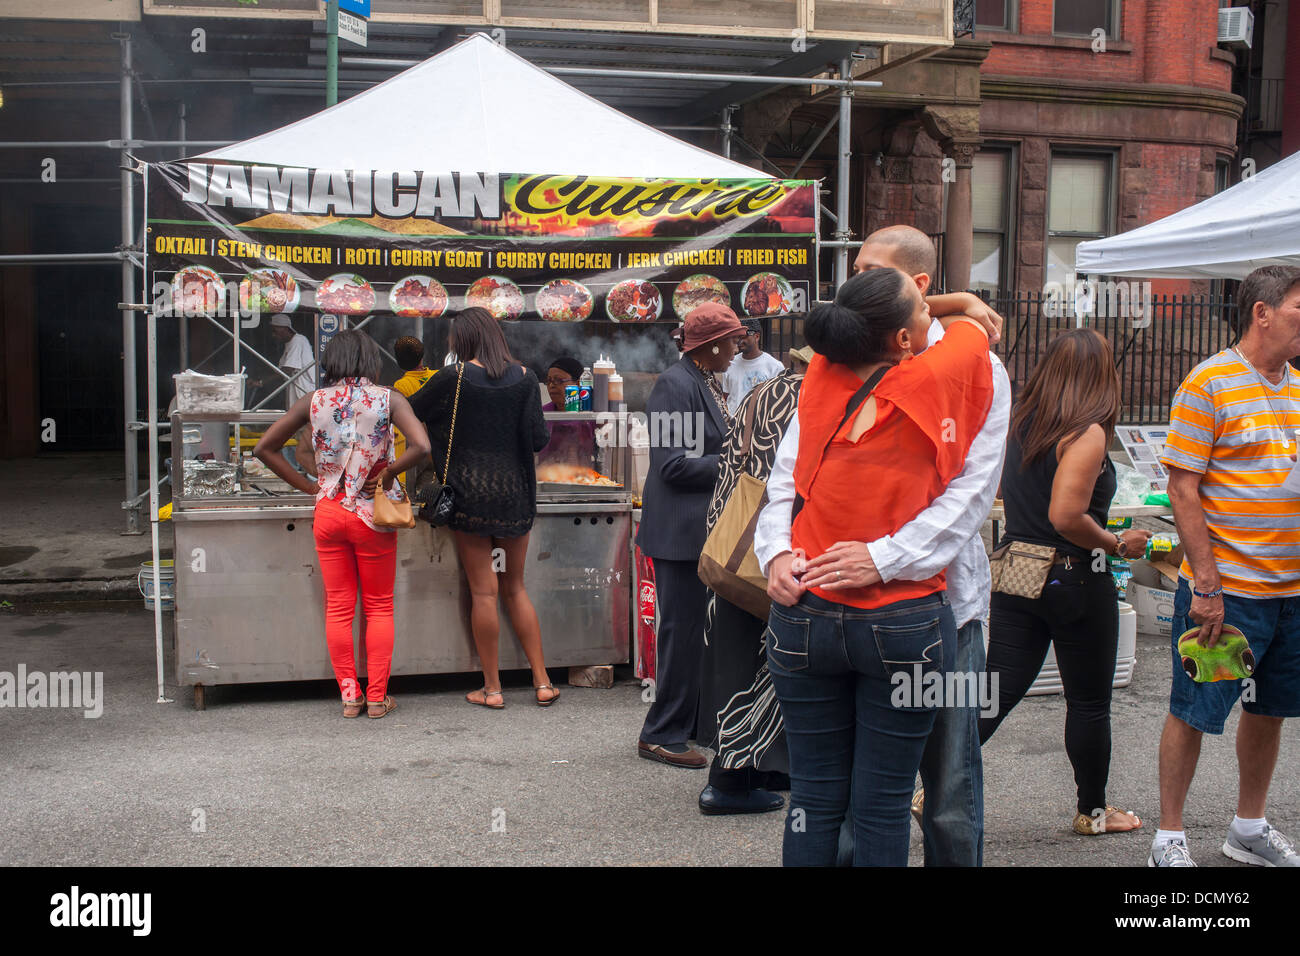 Jamaican cuisine sold at the Harlem Week street fair on West 135th Street in Harlem in New York Stock Photo